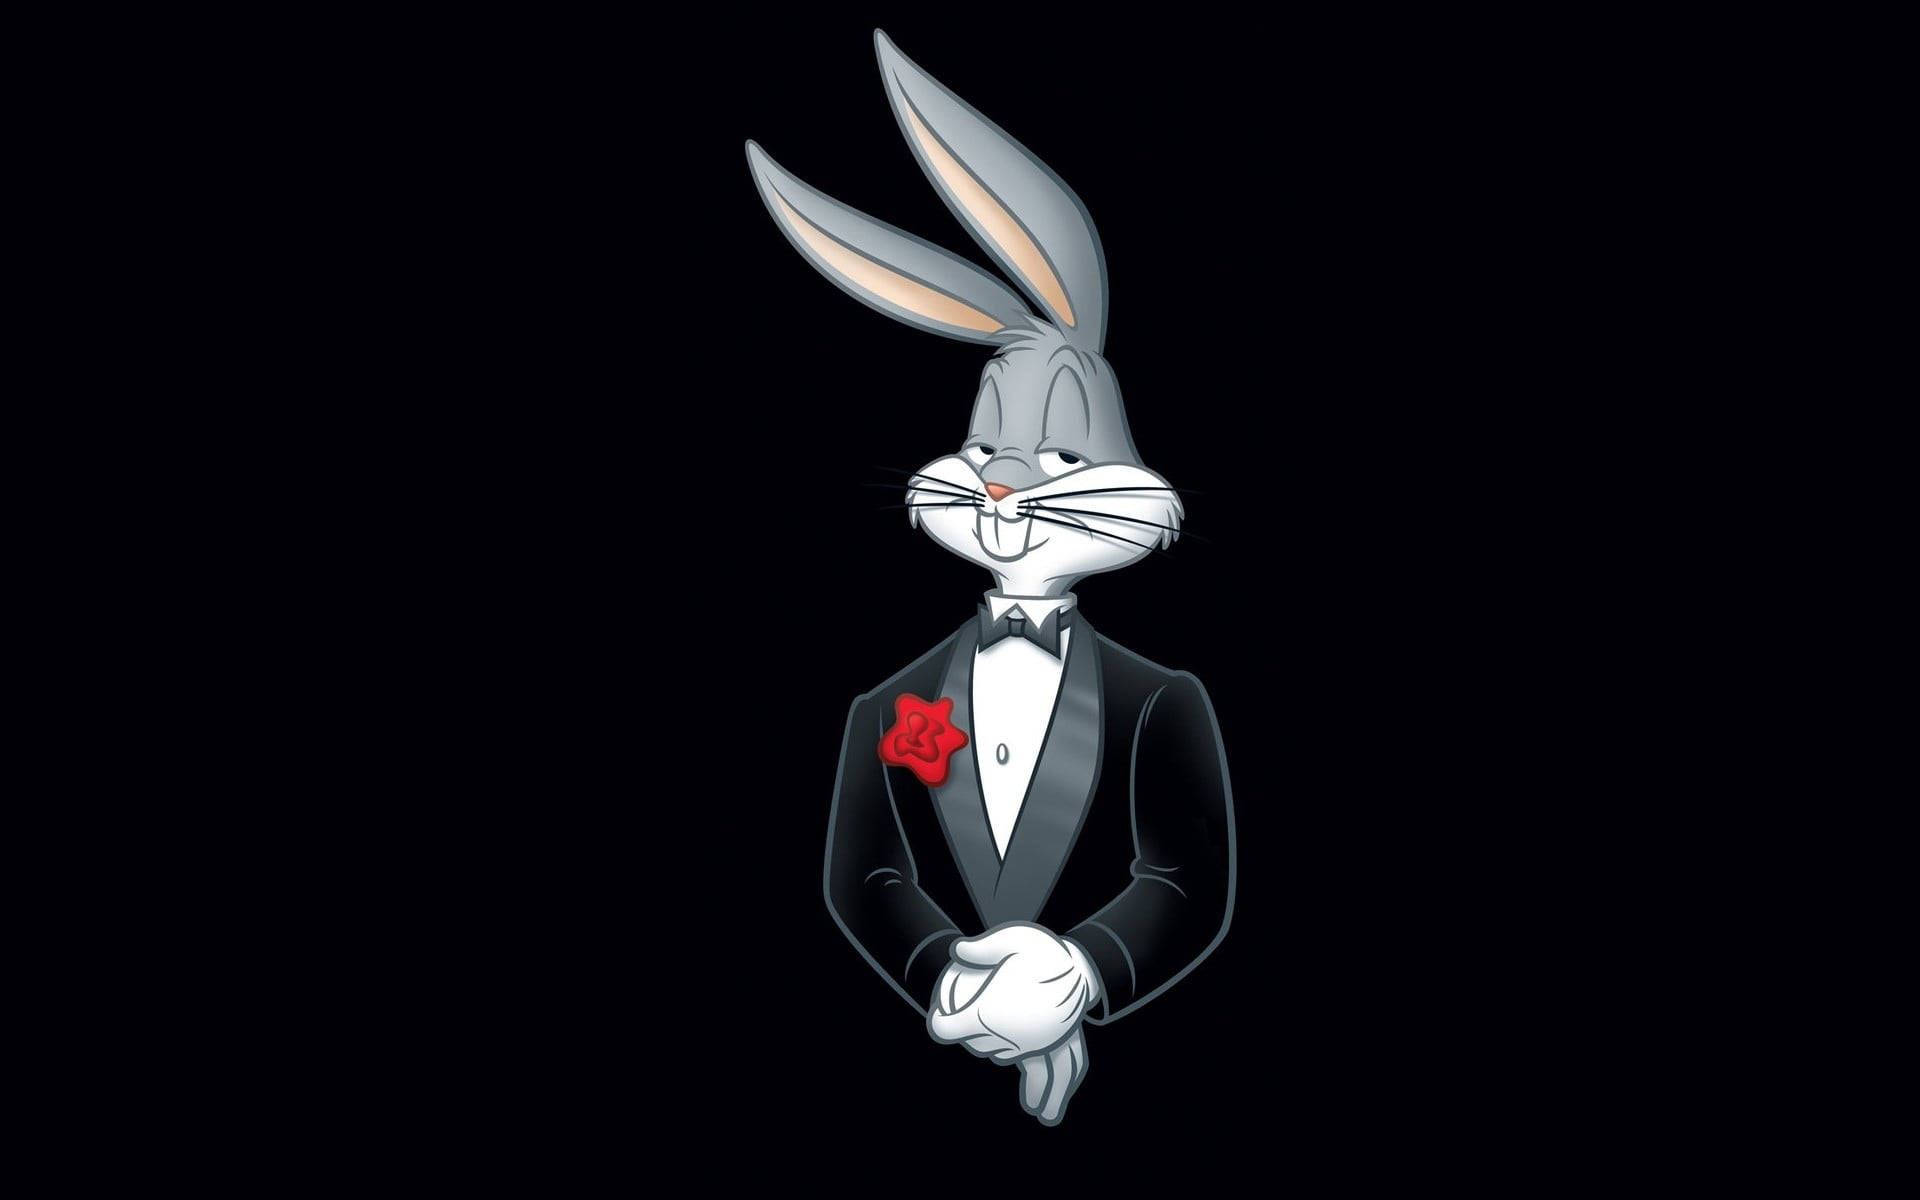 Looney Tunes Bugs Bunny In Suit Background